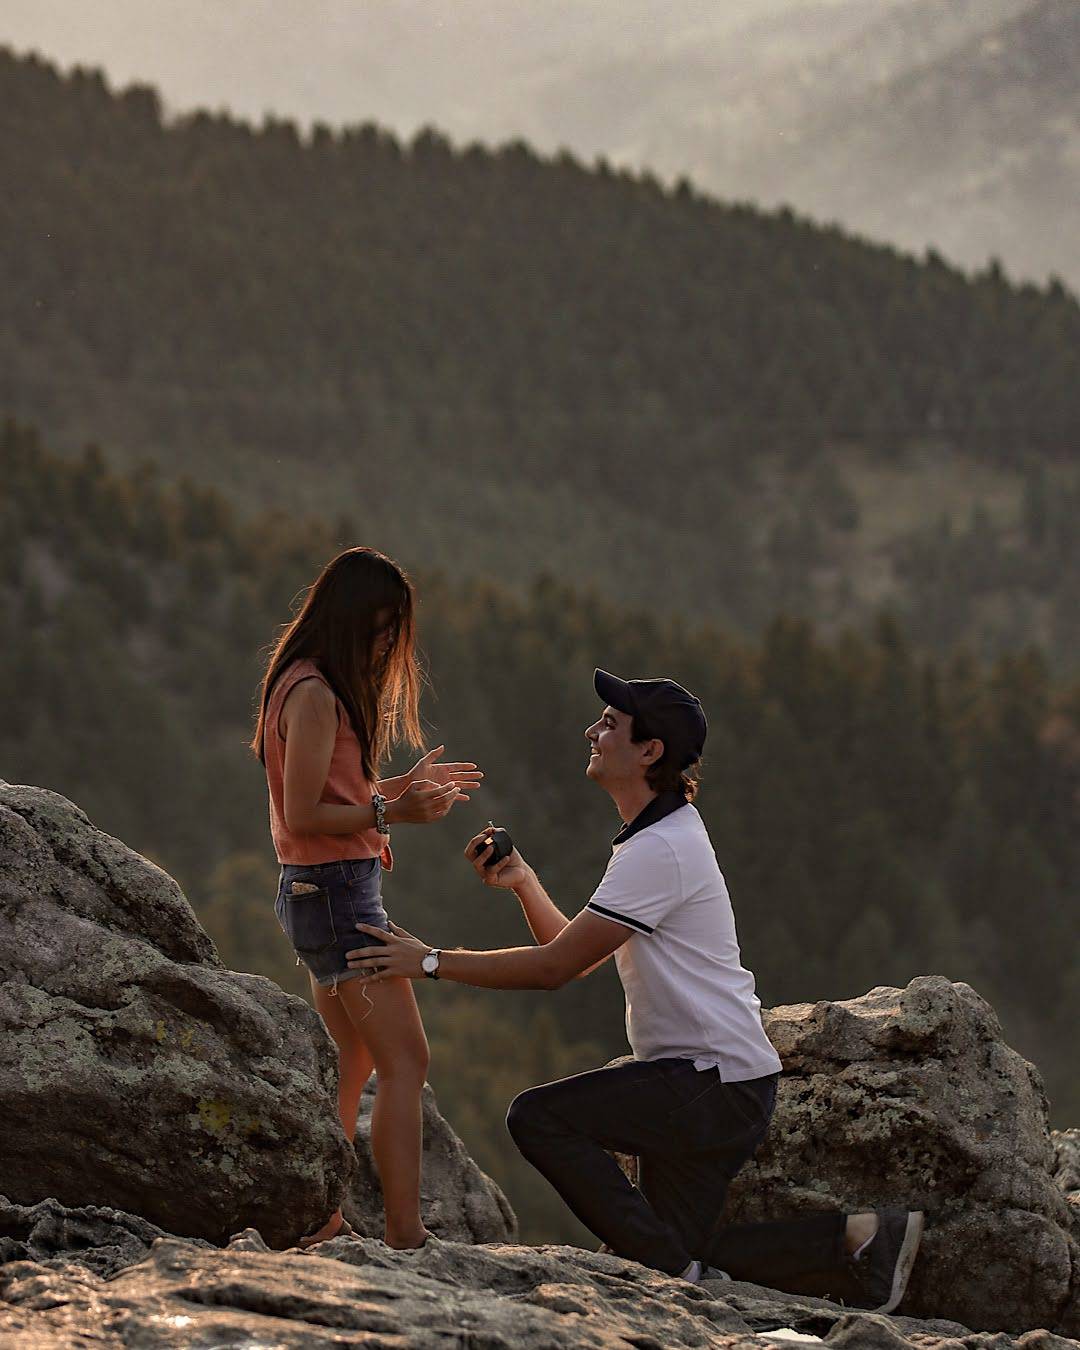 Jordan Proposing to Linda Overlooking the Rocky Mountains with an Engagement Ring from Henne Jewelers